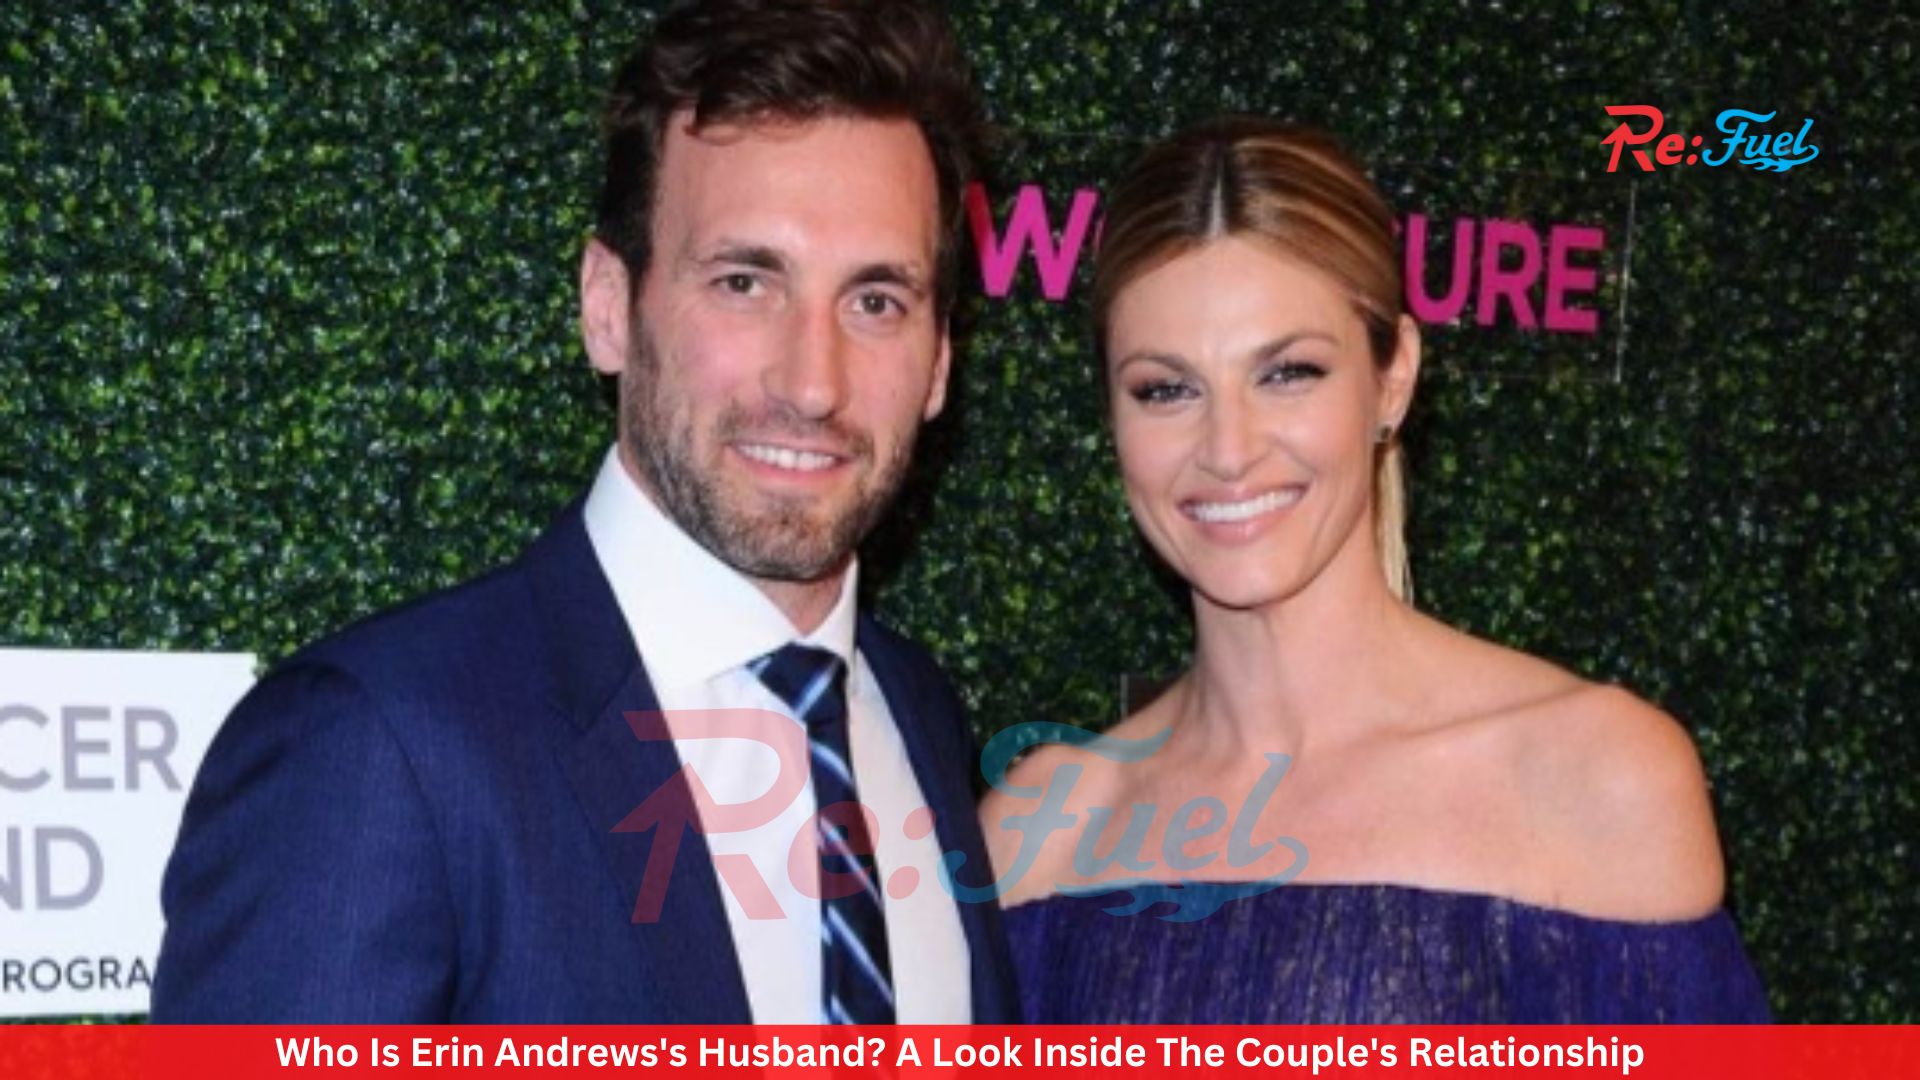 Who Is Erin Andrews's Husband? A Look Inside The Couple's Relationship